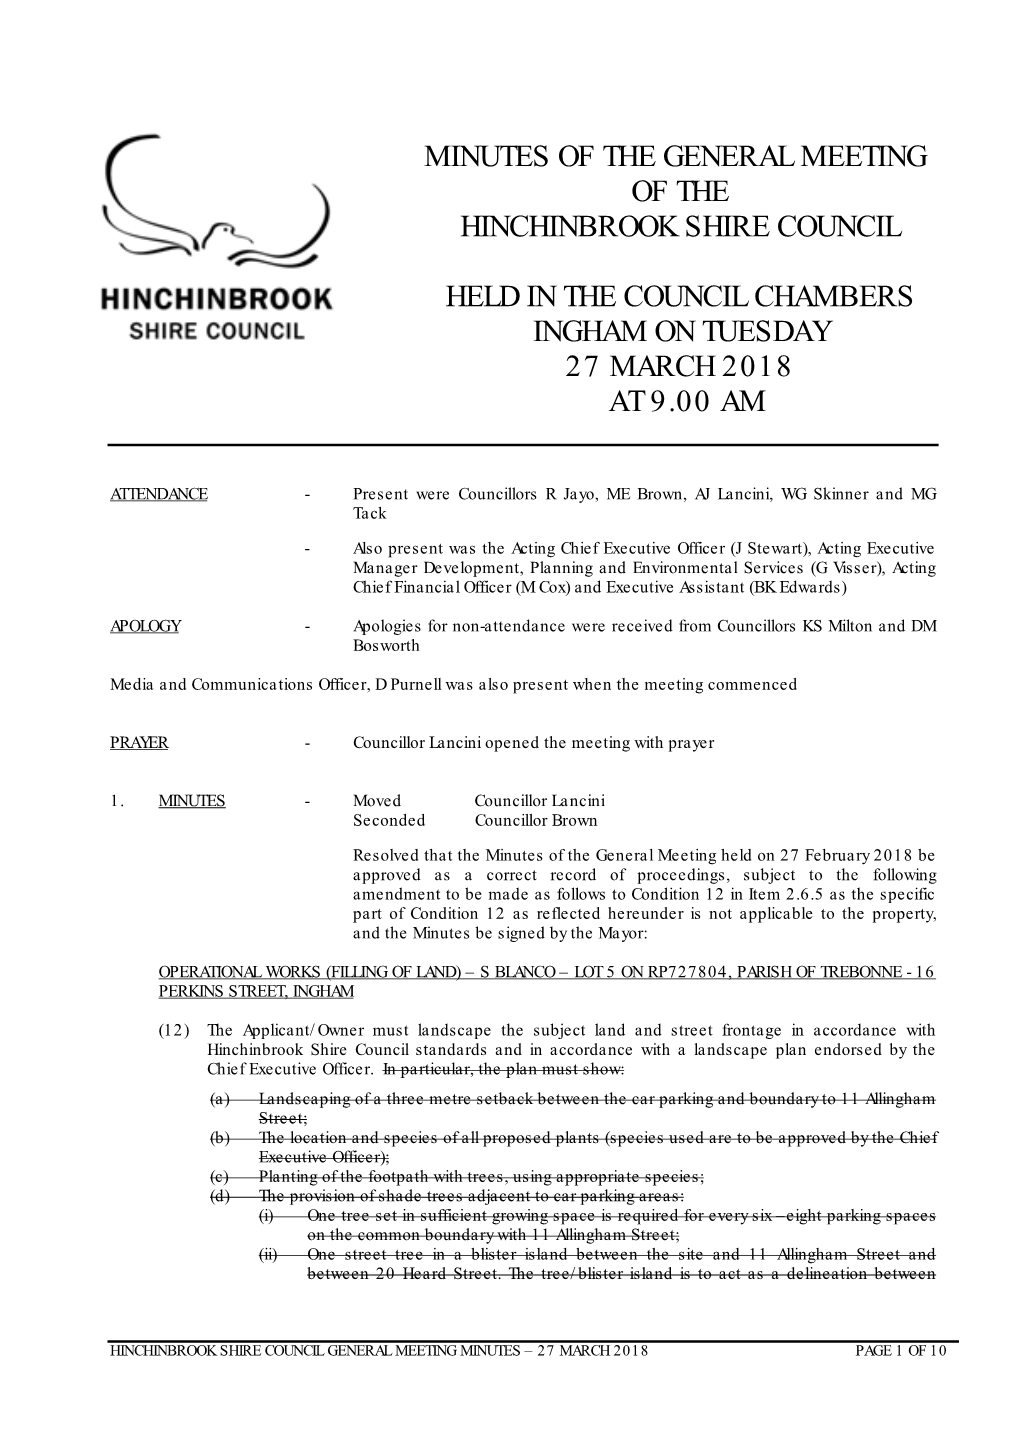 Minutes of the General Meeting of the Hinchinbrook Shire Council Held In